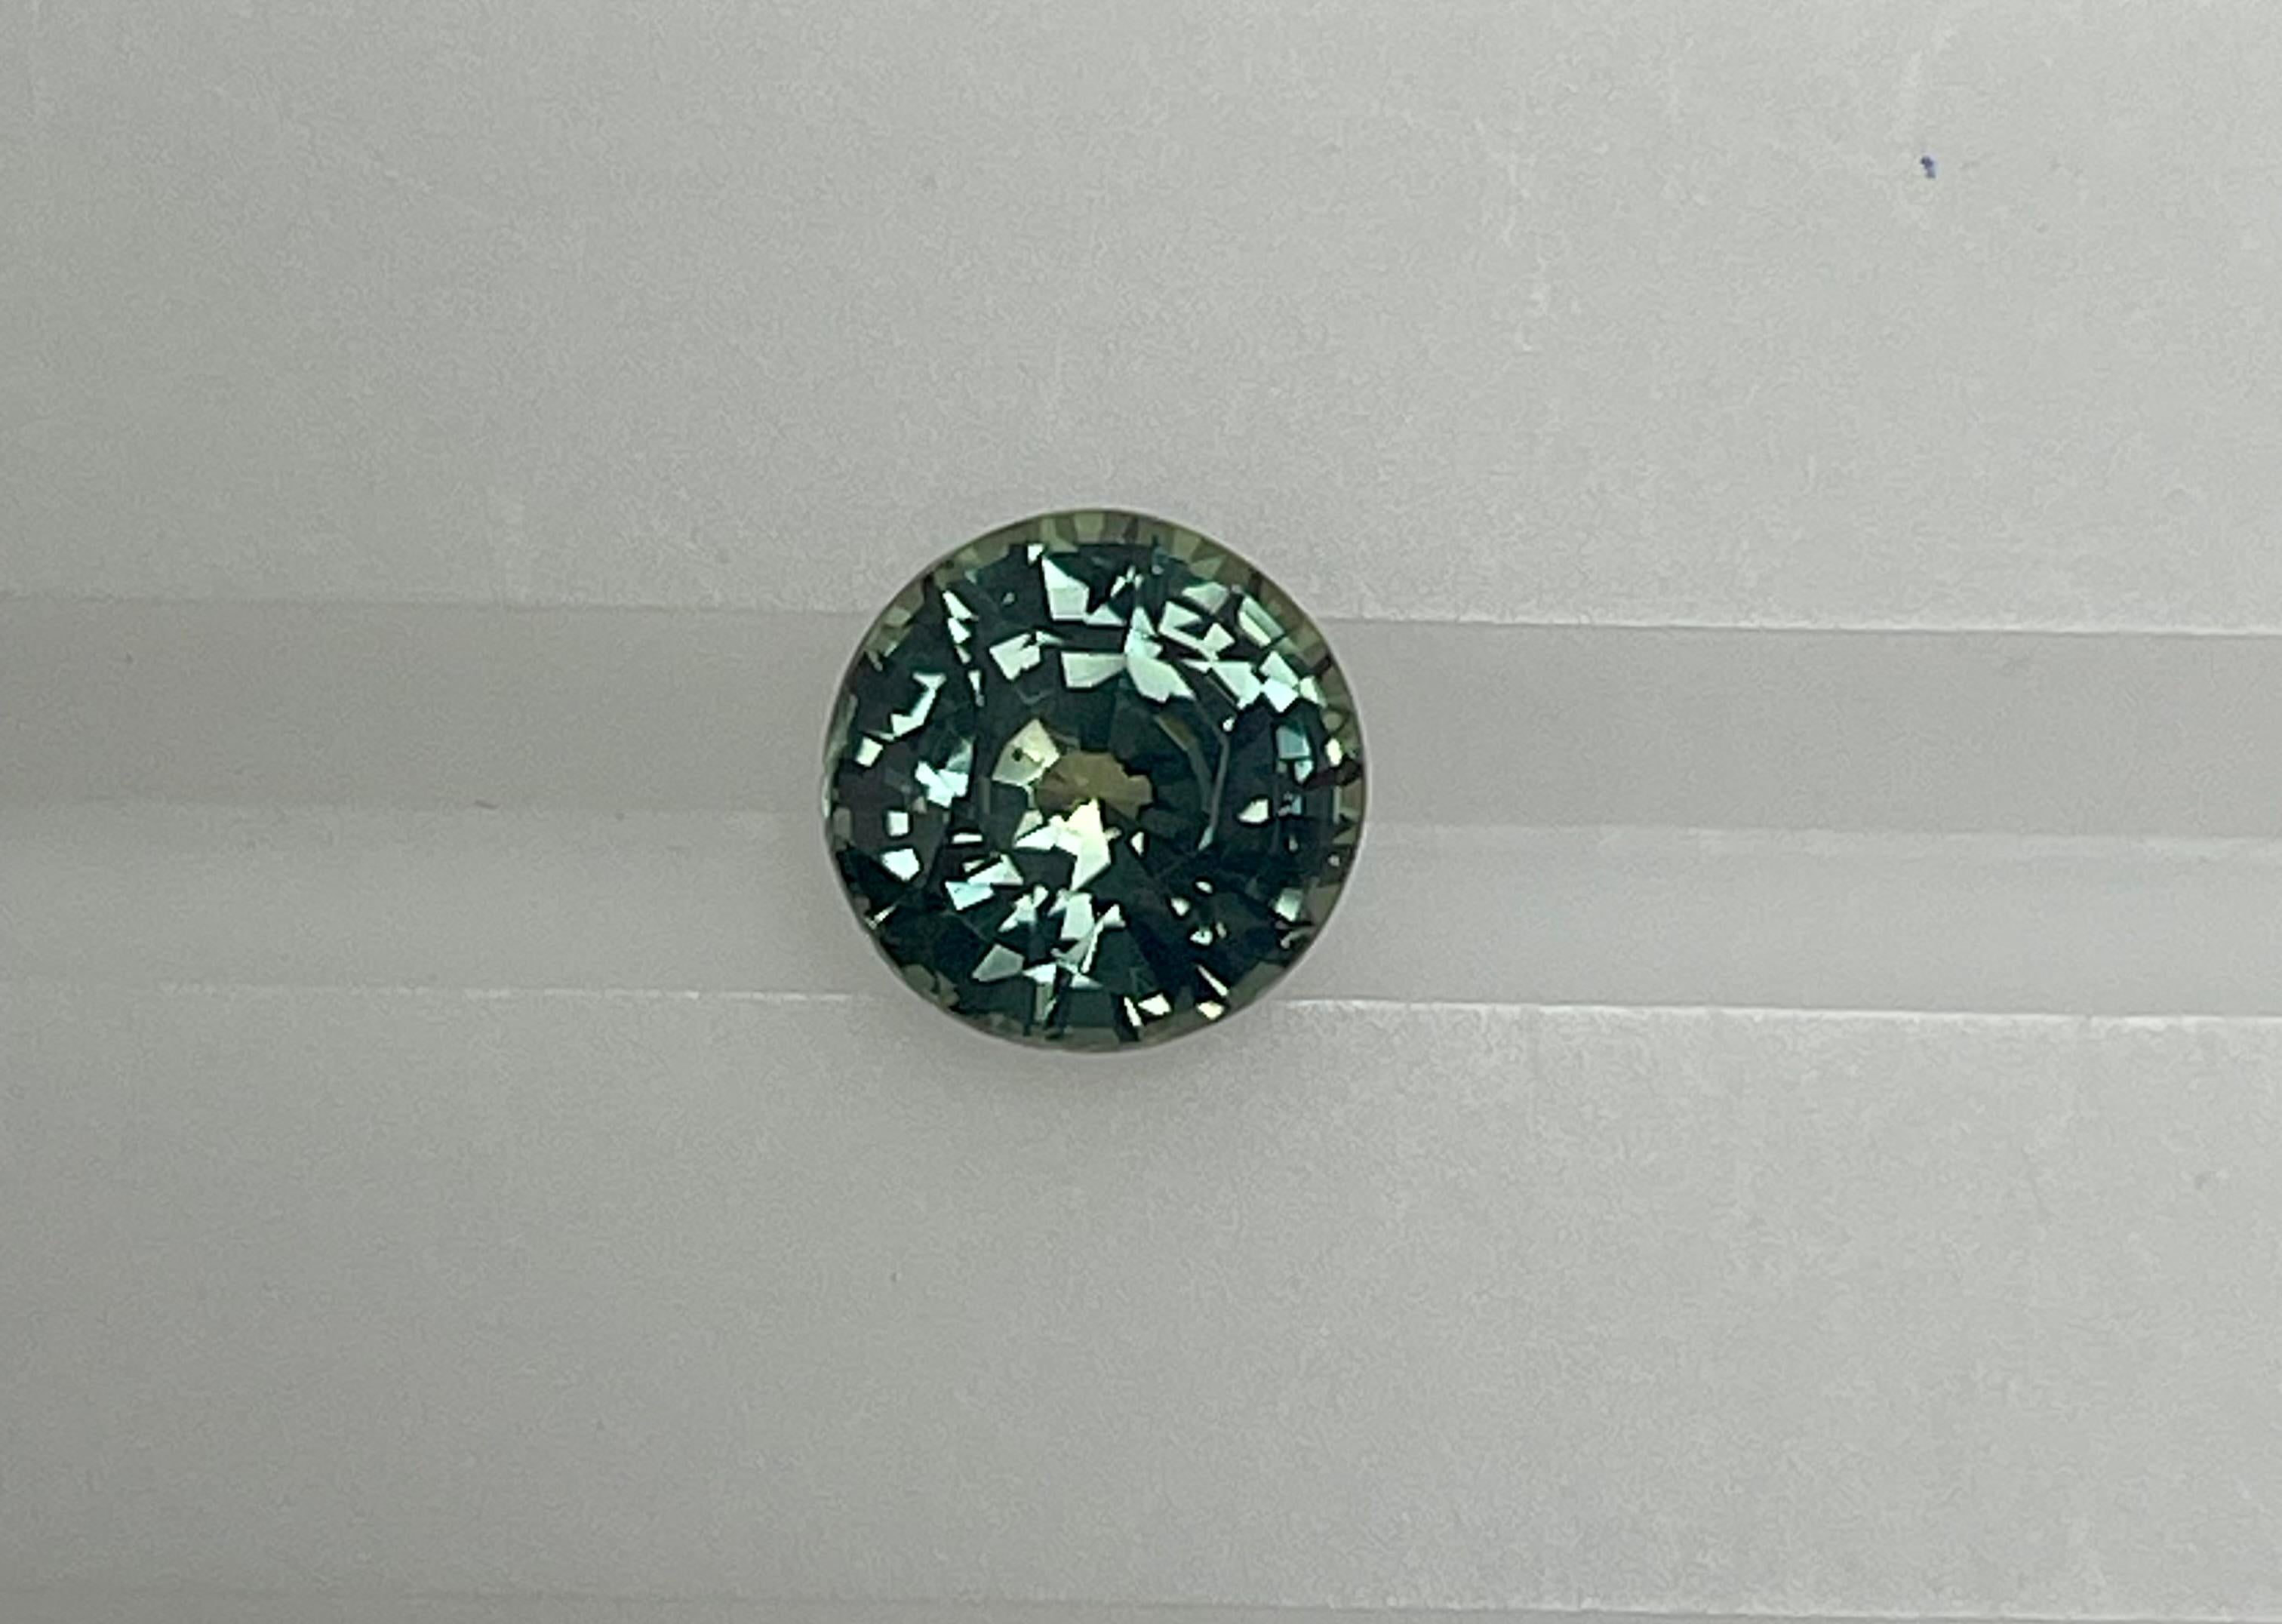 This 1.72 Ct Round shape sapphire exhibits great mix of blue and green color which is referred to as Teal color . The round shape and the color and quality of this stone makes it very unique and very much in demand.
